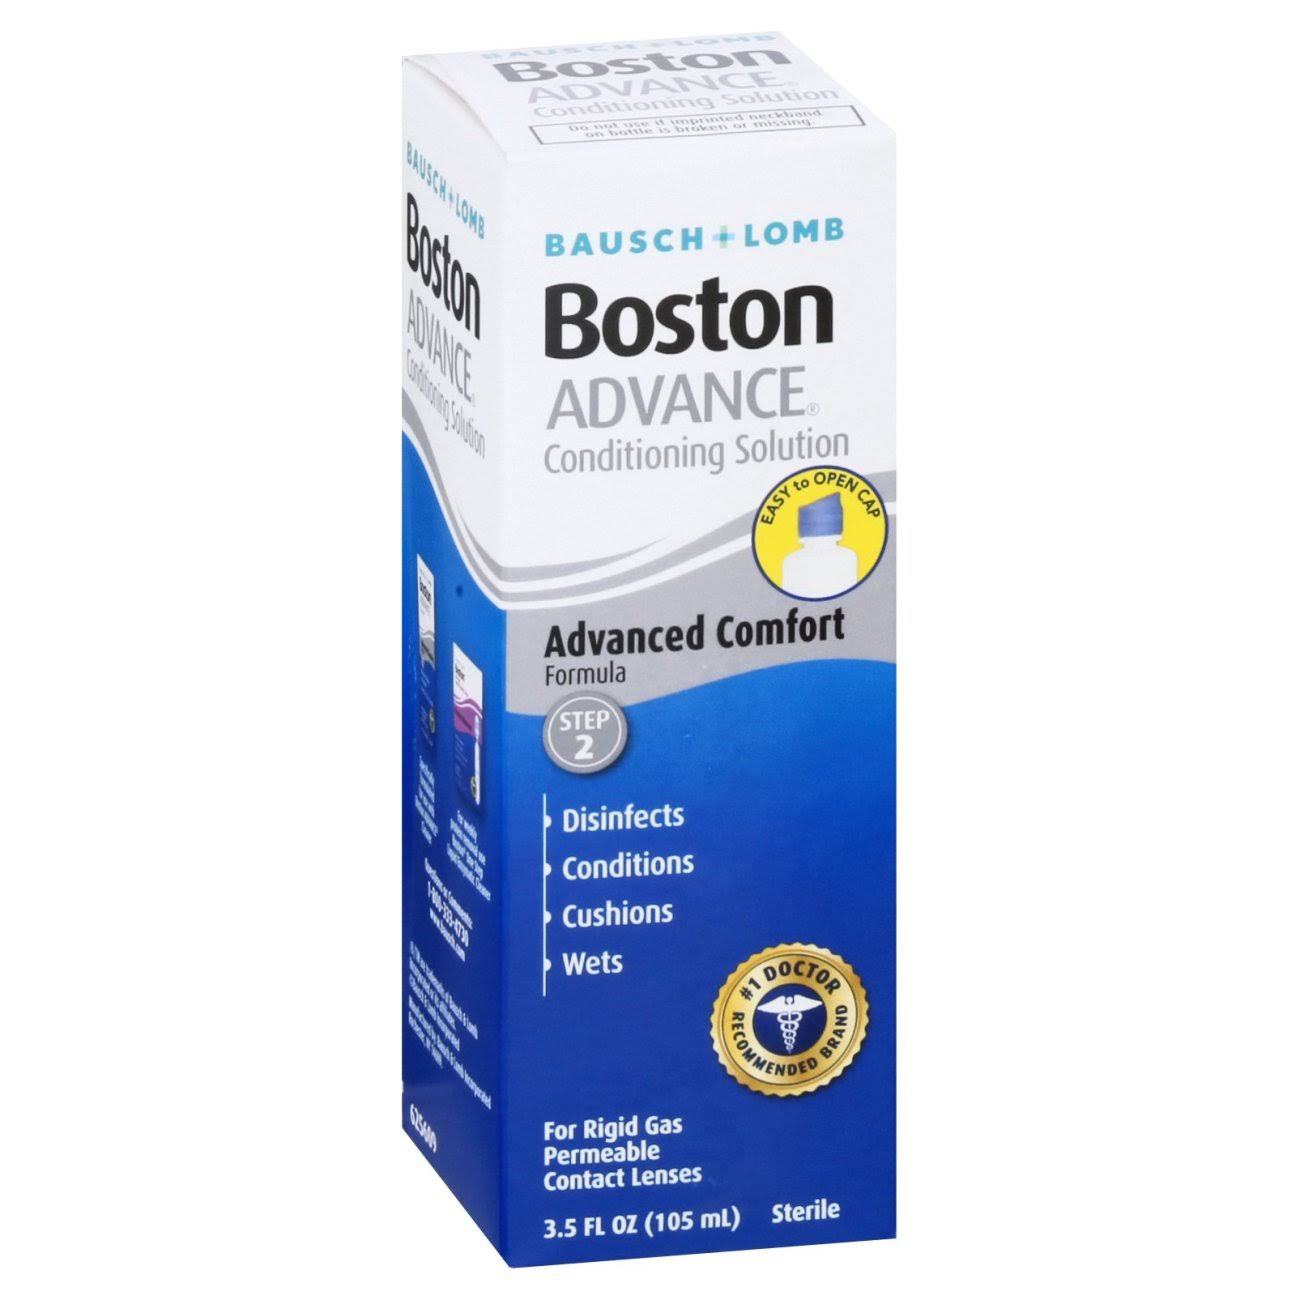 Bausch & Lomb Boston Advance Conditioning Solution - 105ml